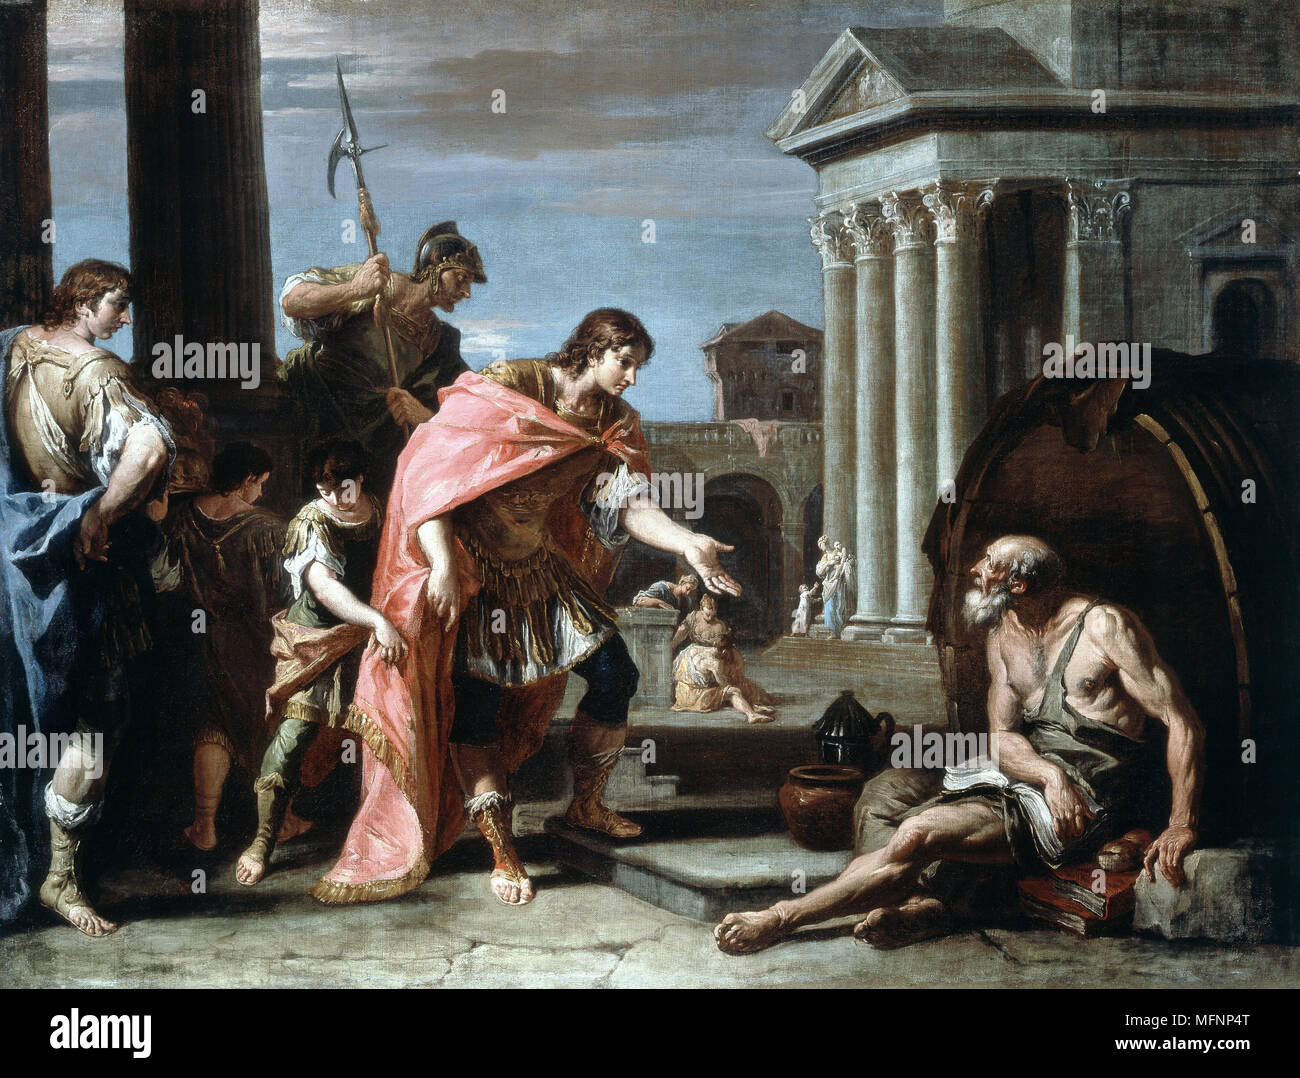 Alexander and Diogenes. Alexander The Great (Alexander III of Macedon 356-323 BC) visiting Diogenes of Sinope (c410 -c320 BC), Greek Cynic philosopher living in his tub in Athens. Sebastiano Ricci (or Rizzi, 1662-1734) Italian painter.   Oil on canvas. Stock Photo